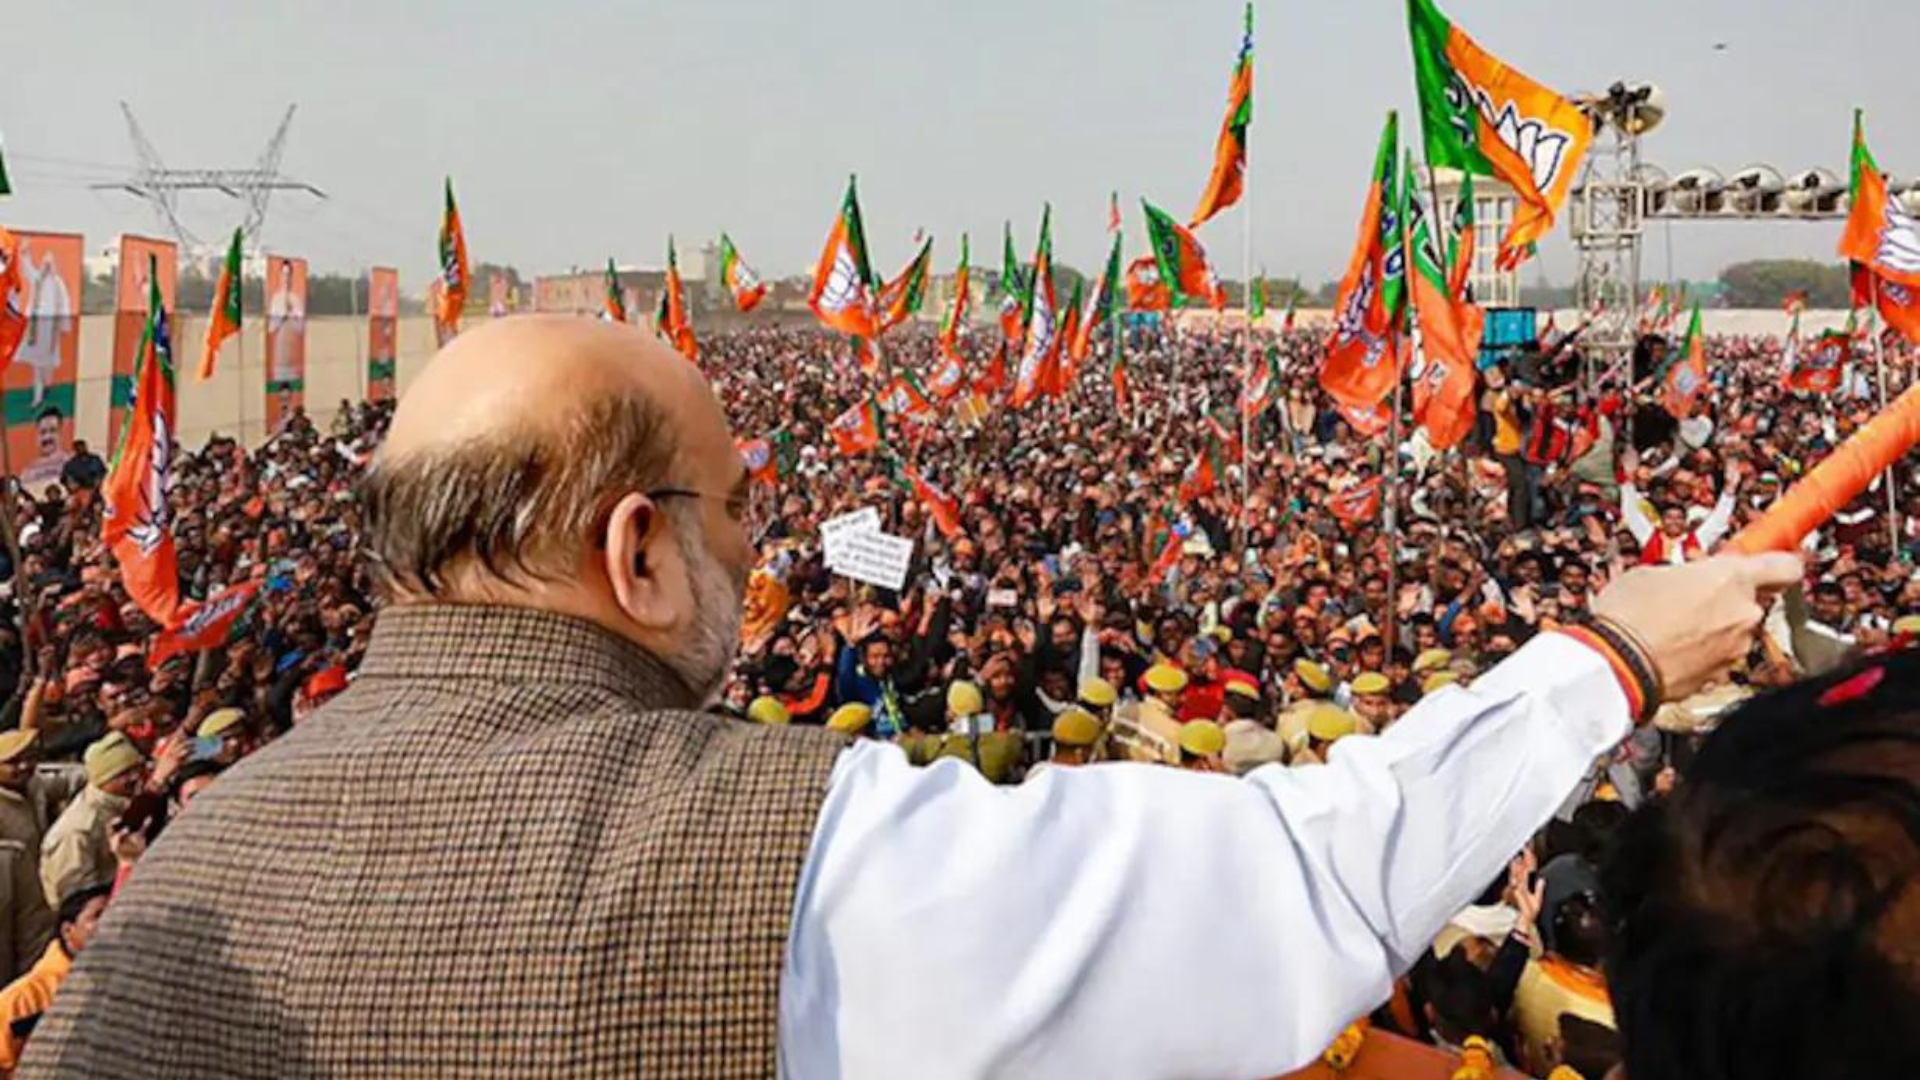 Amit Shah: “Every vote of yours has power to create secure, developed, and self-reliant India”